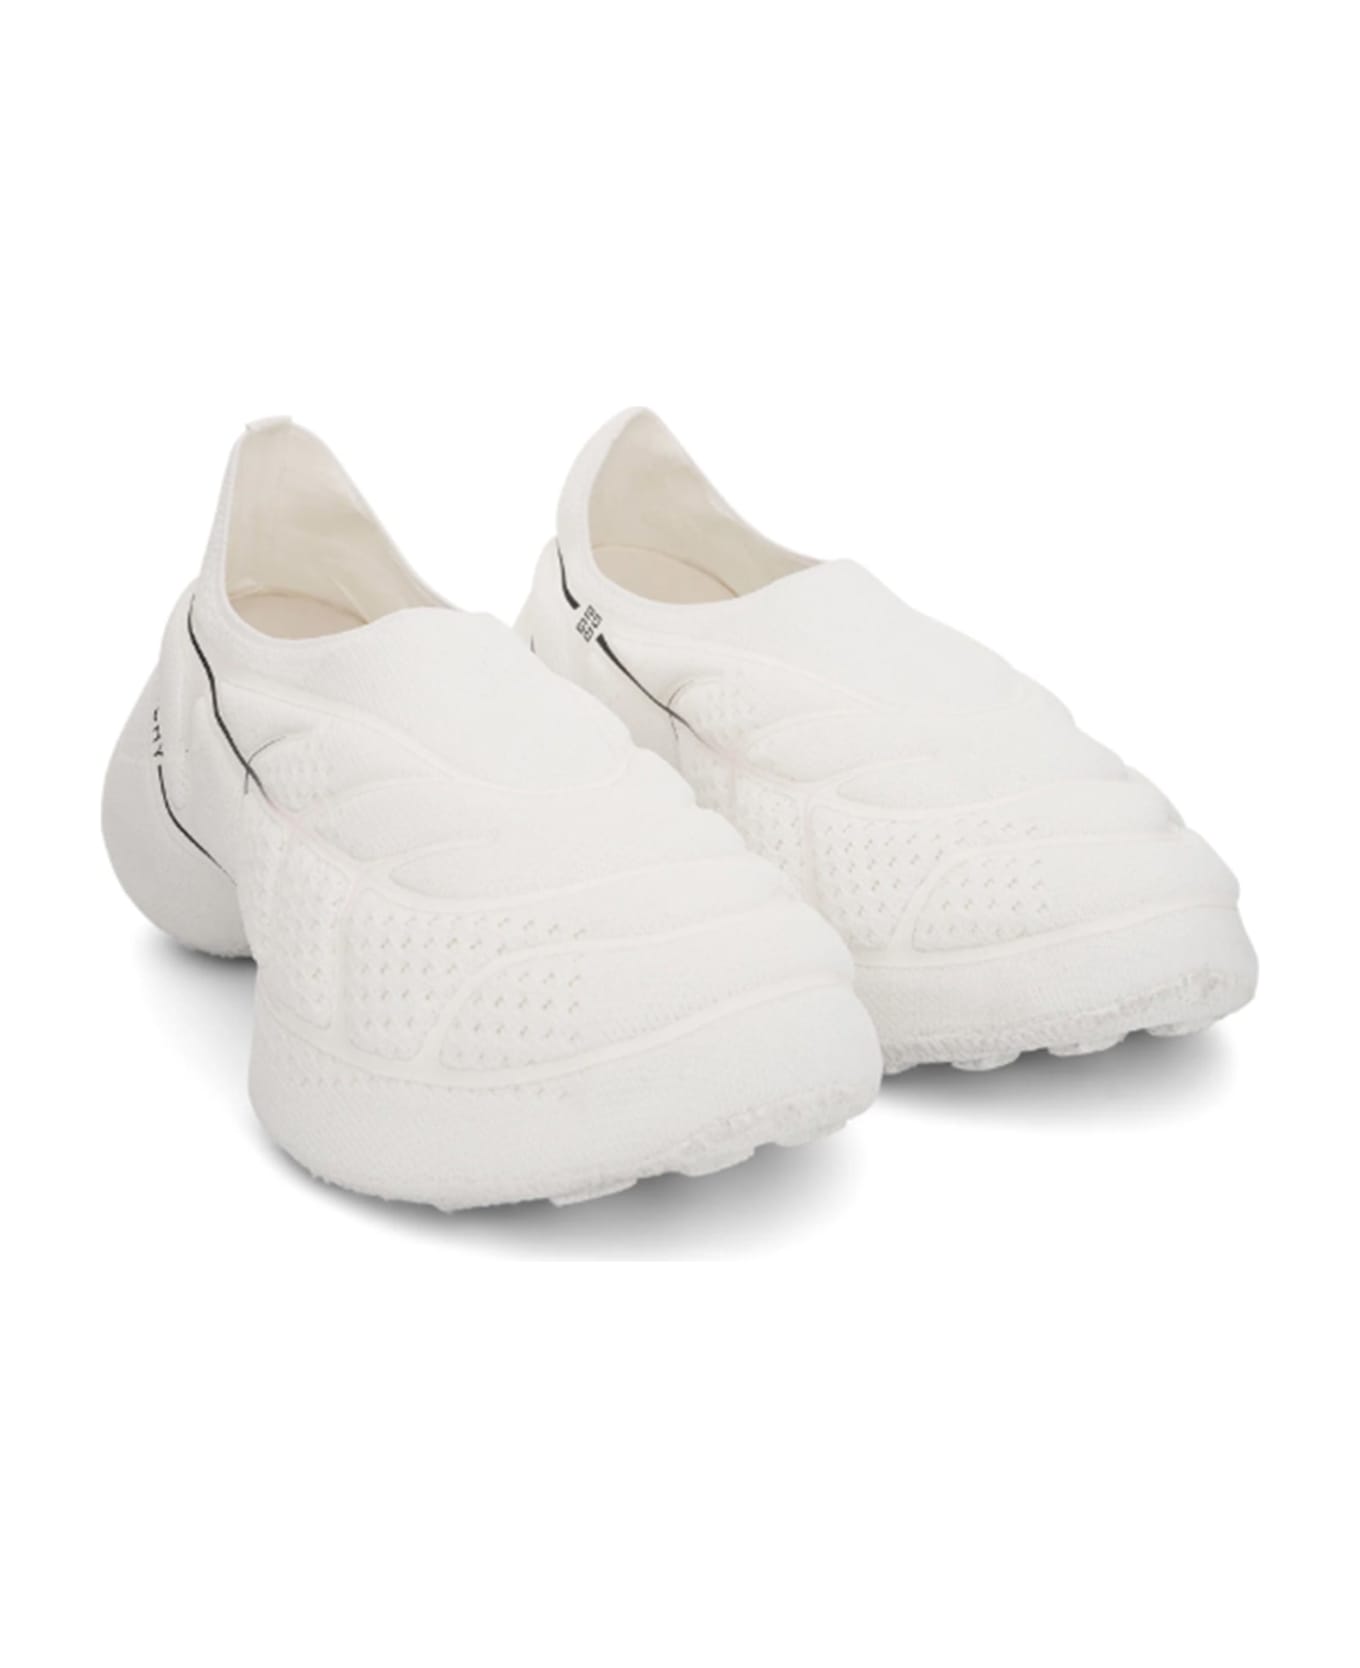 Givenchy Tk-360 Sneakers - White スニーカー